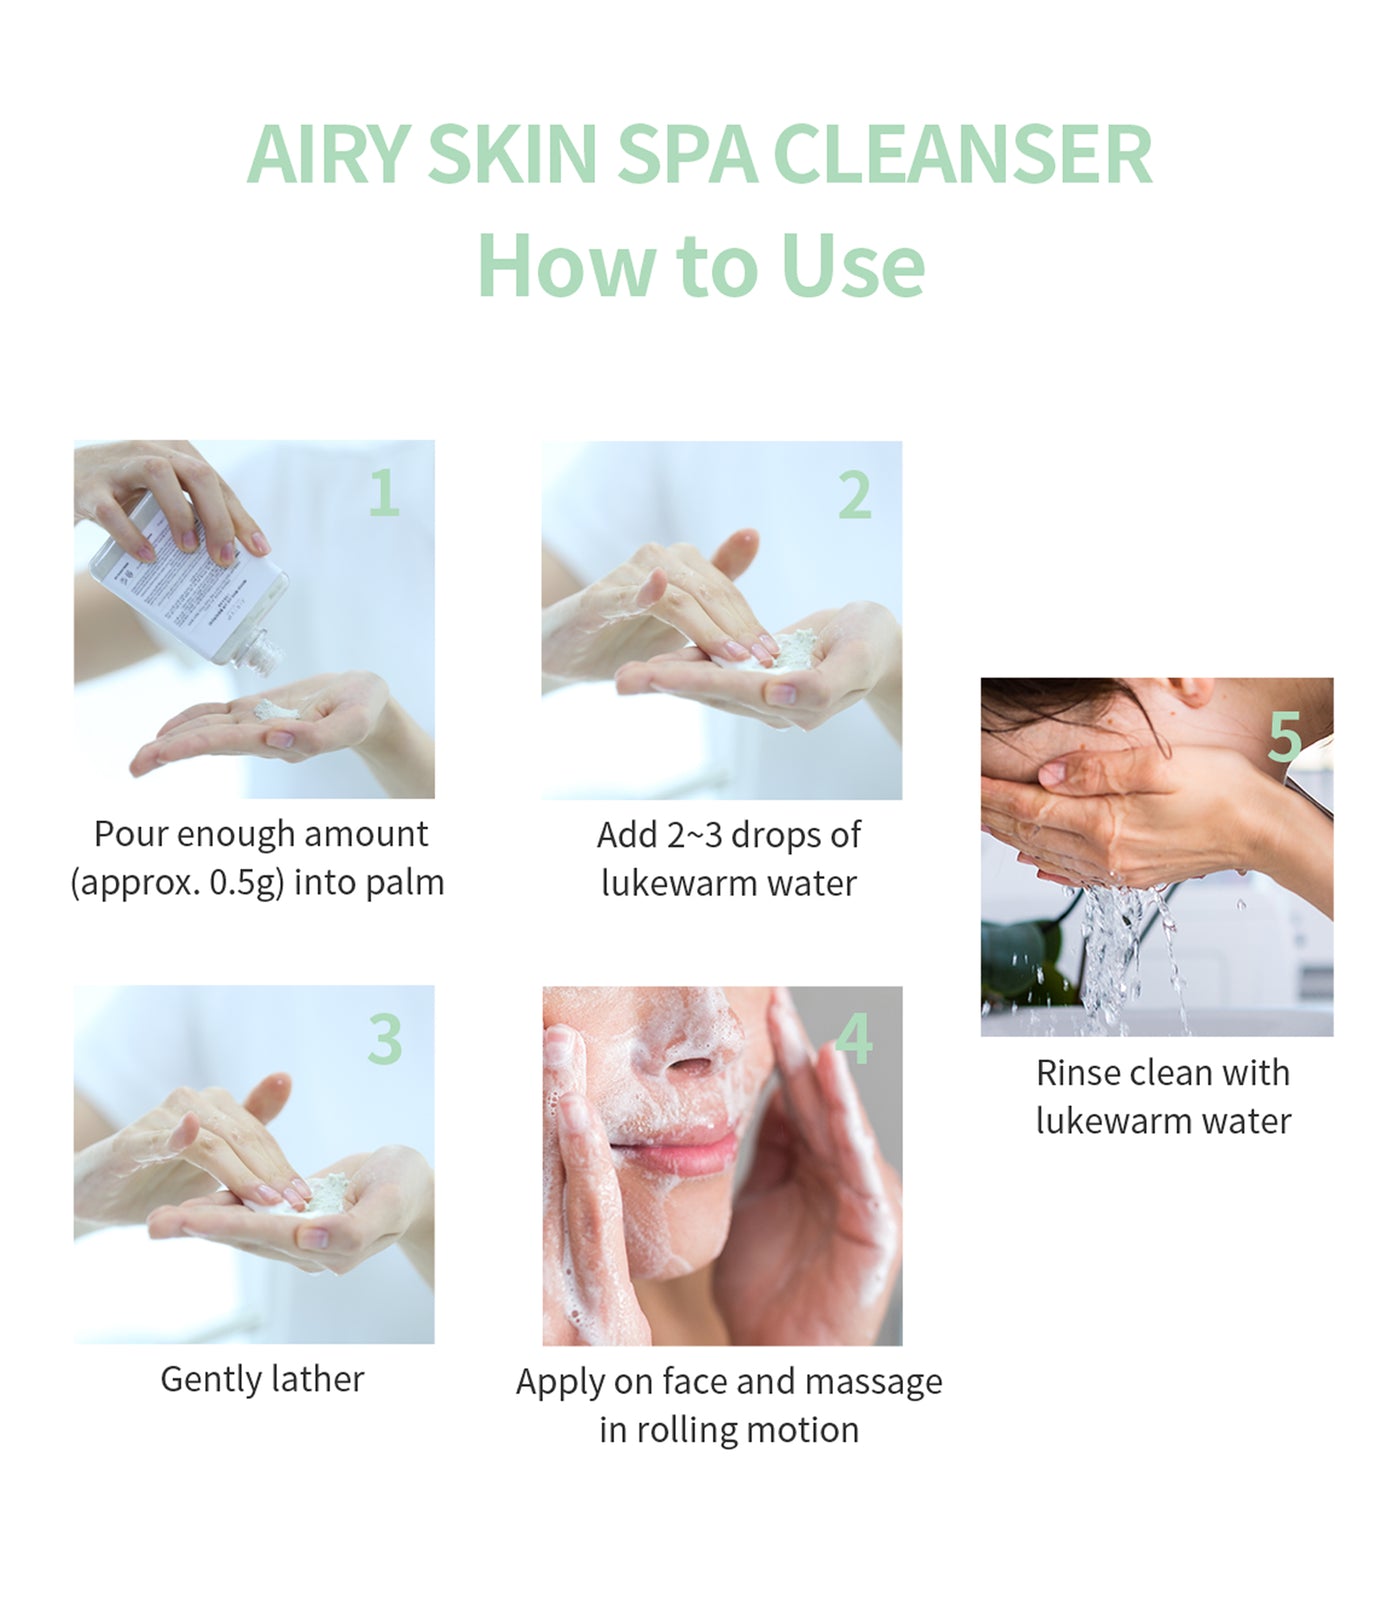 AIRIVE Airy Skin Spa Cleanser - Mild acidic pH + Soothe & Hydrate (50g)